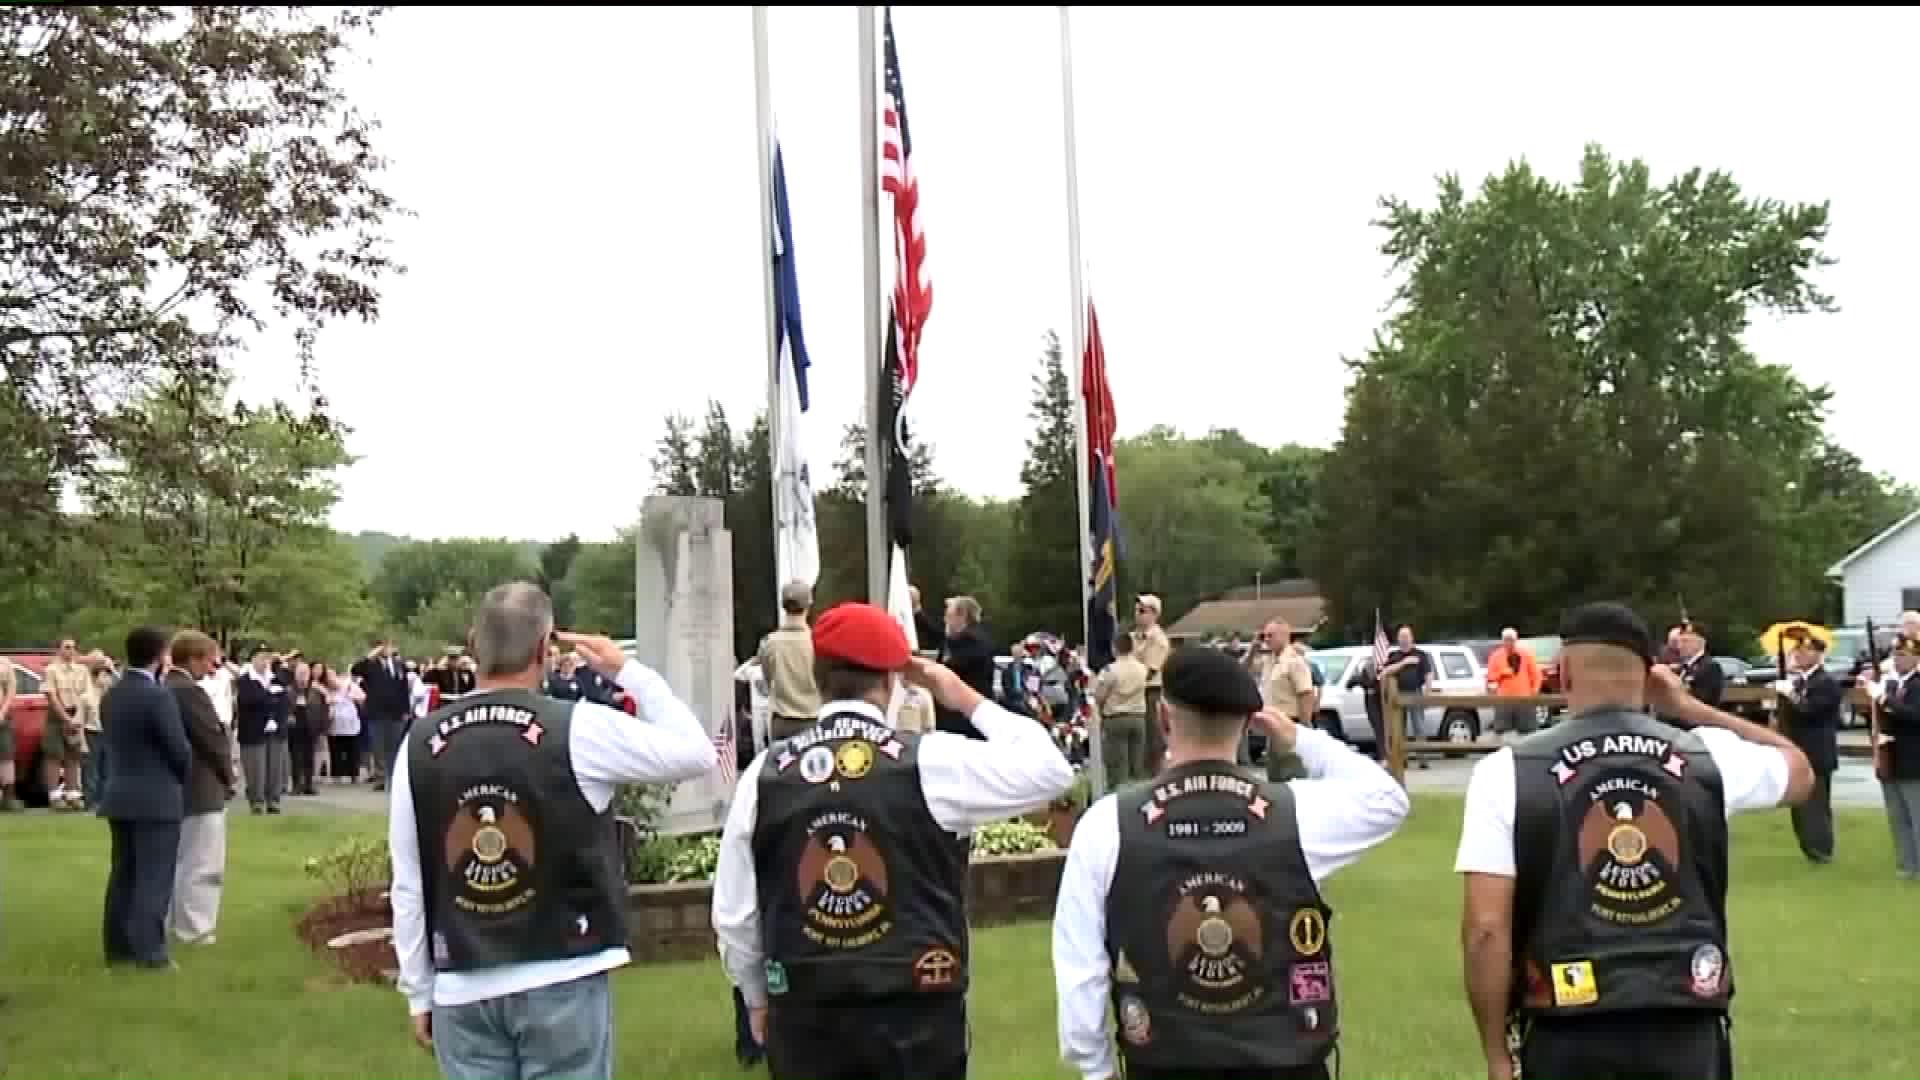 Hundreds Attend Annual Memorial Day Ceremony in the Poconos